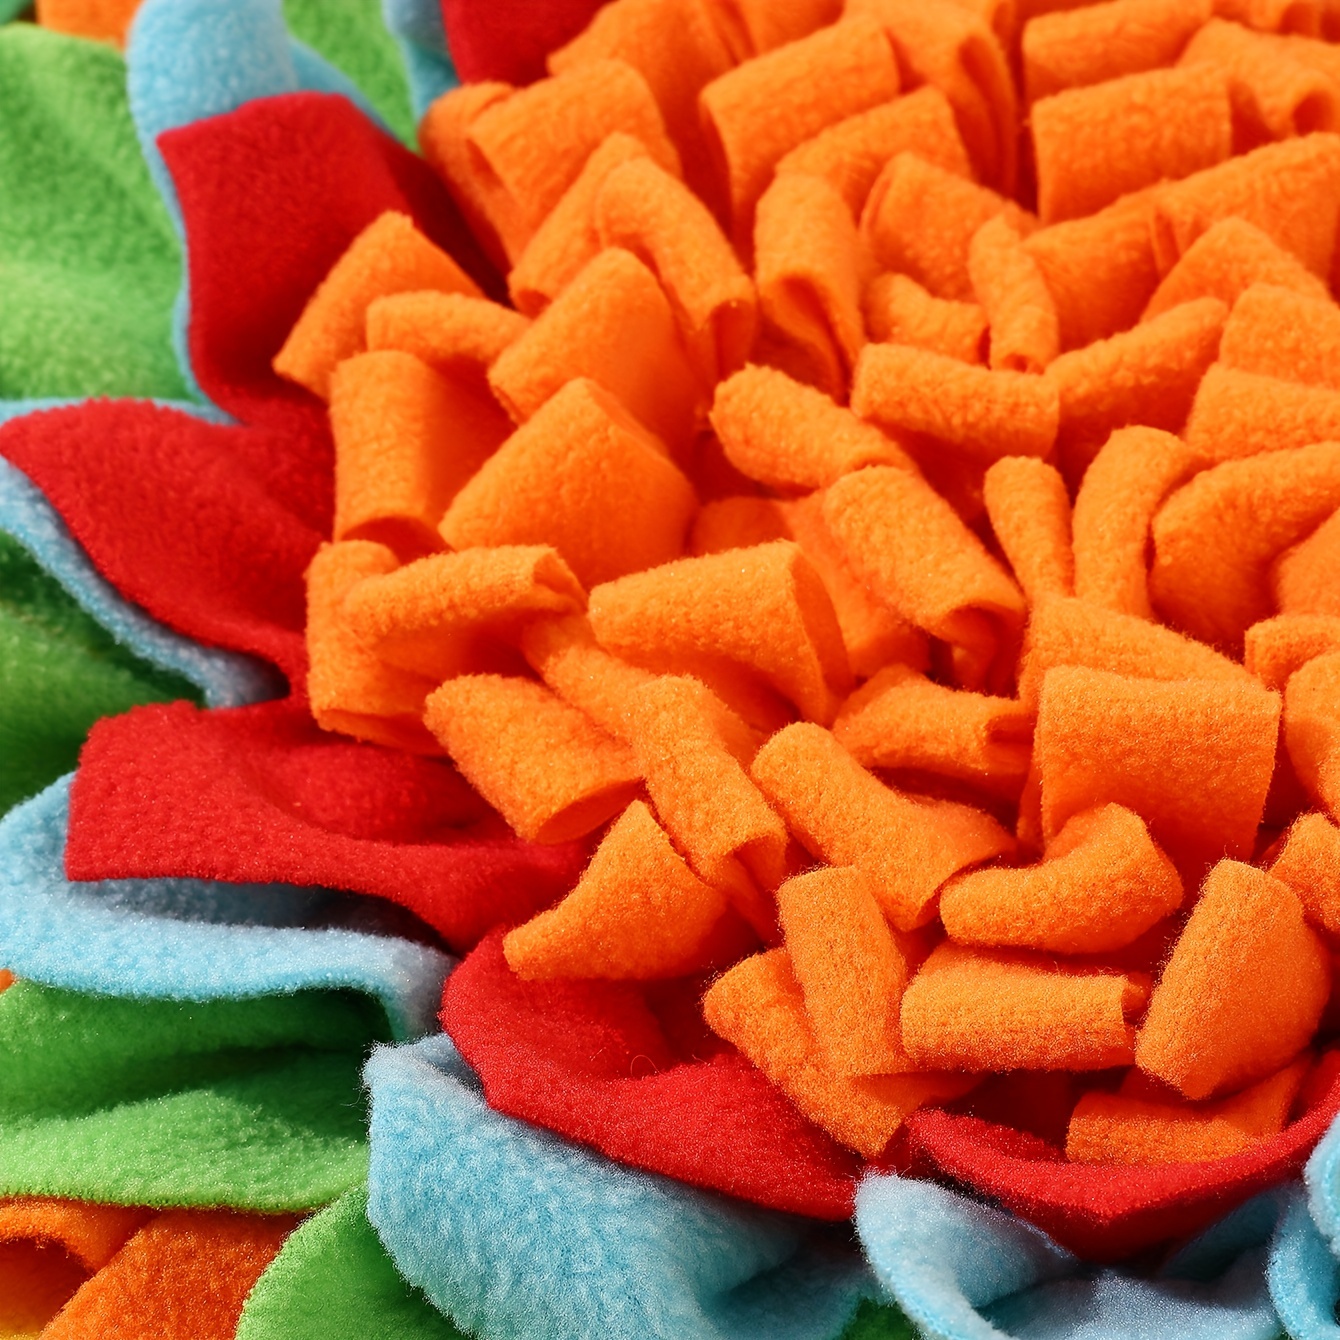 Keep Your Dog Entertained & Stimulated With This Interactive Pet Snuffle Mat!  - Temu